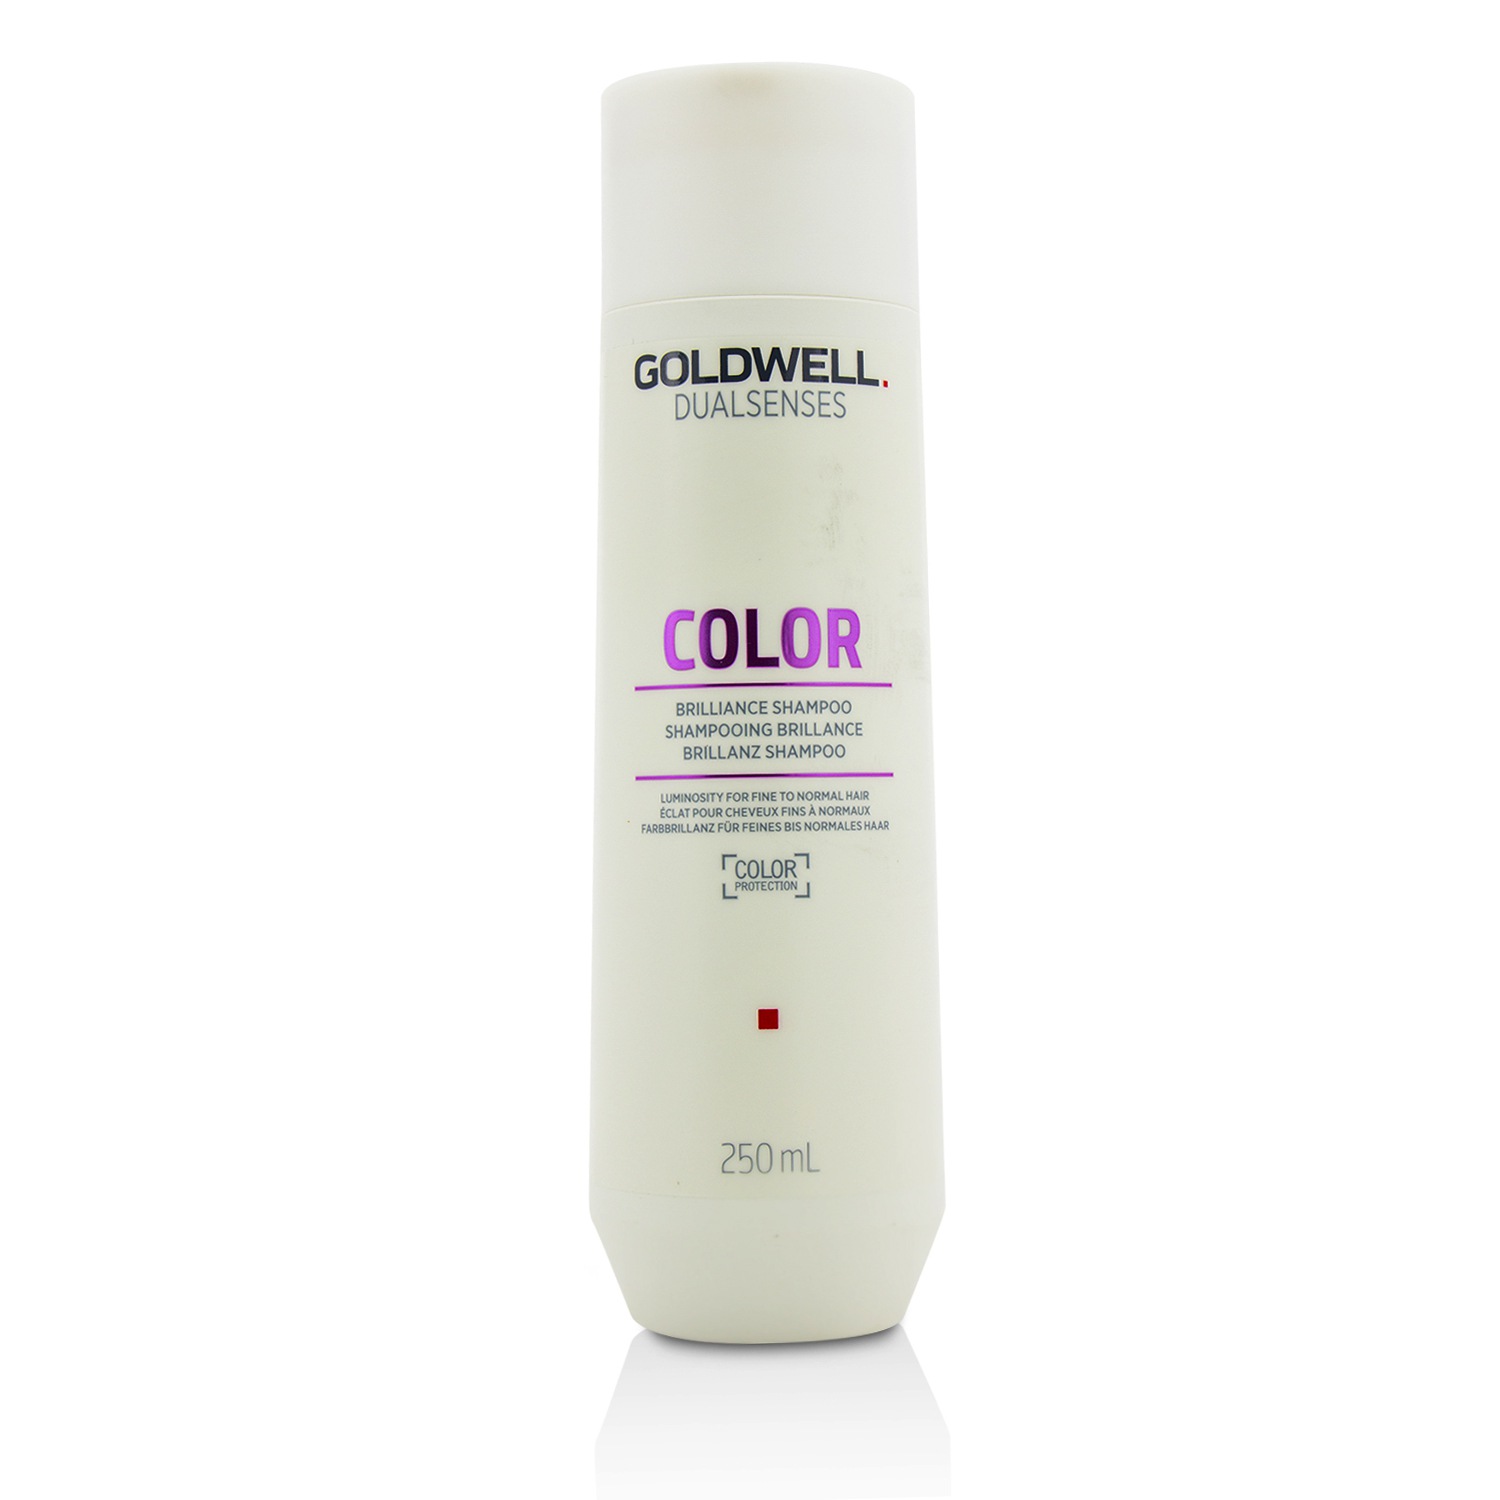 Dual Senses Color Brilliance Shampoo (Luminosity For Fine to Normal Hair) Goldwell Image